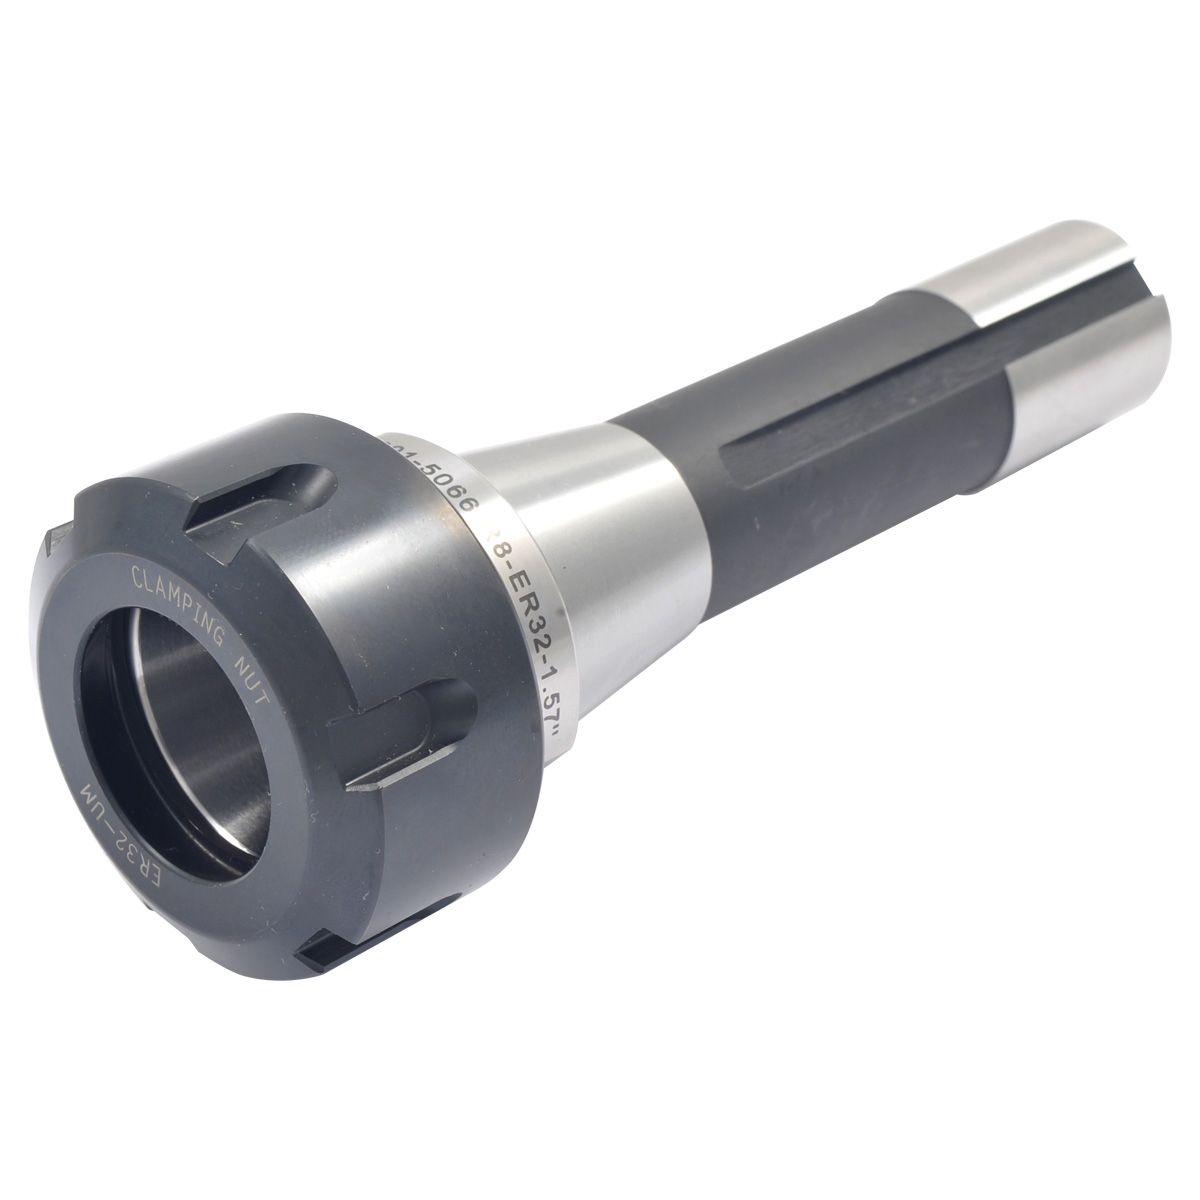 PRO-SERIES R8 ER-32 DRAWBAR END COLLET CHUCK WITH SPANNER NUT (3901-5066)